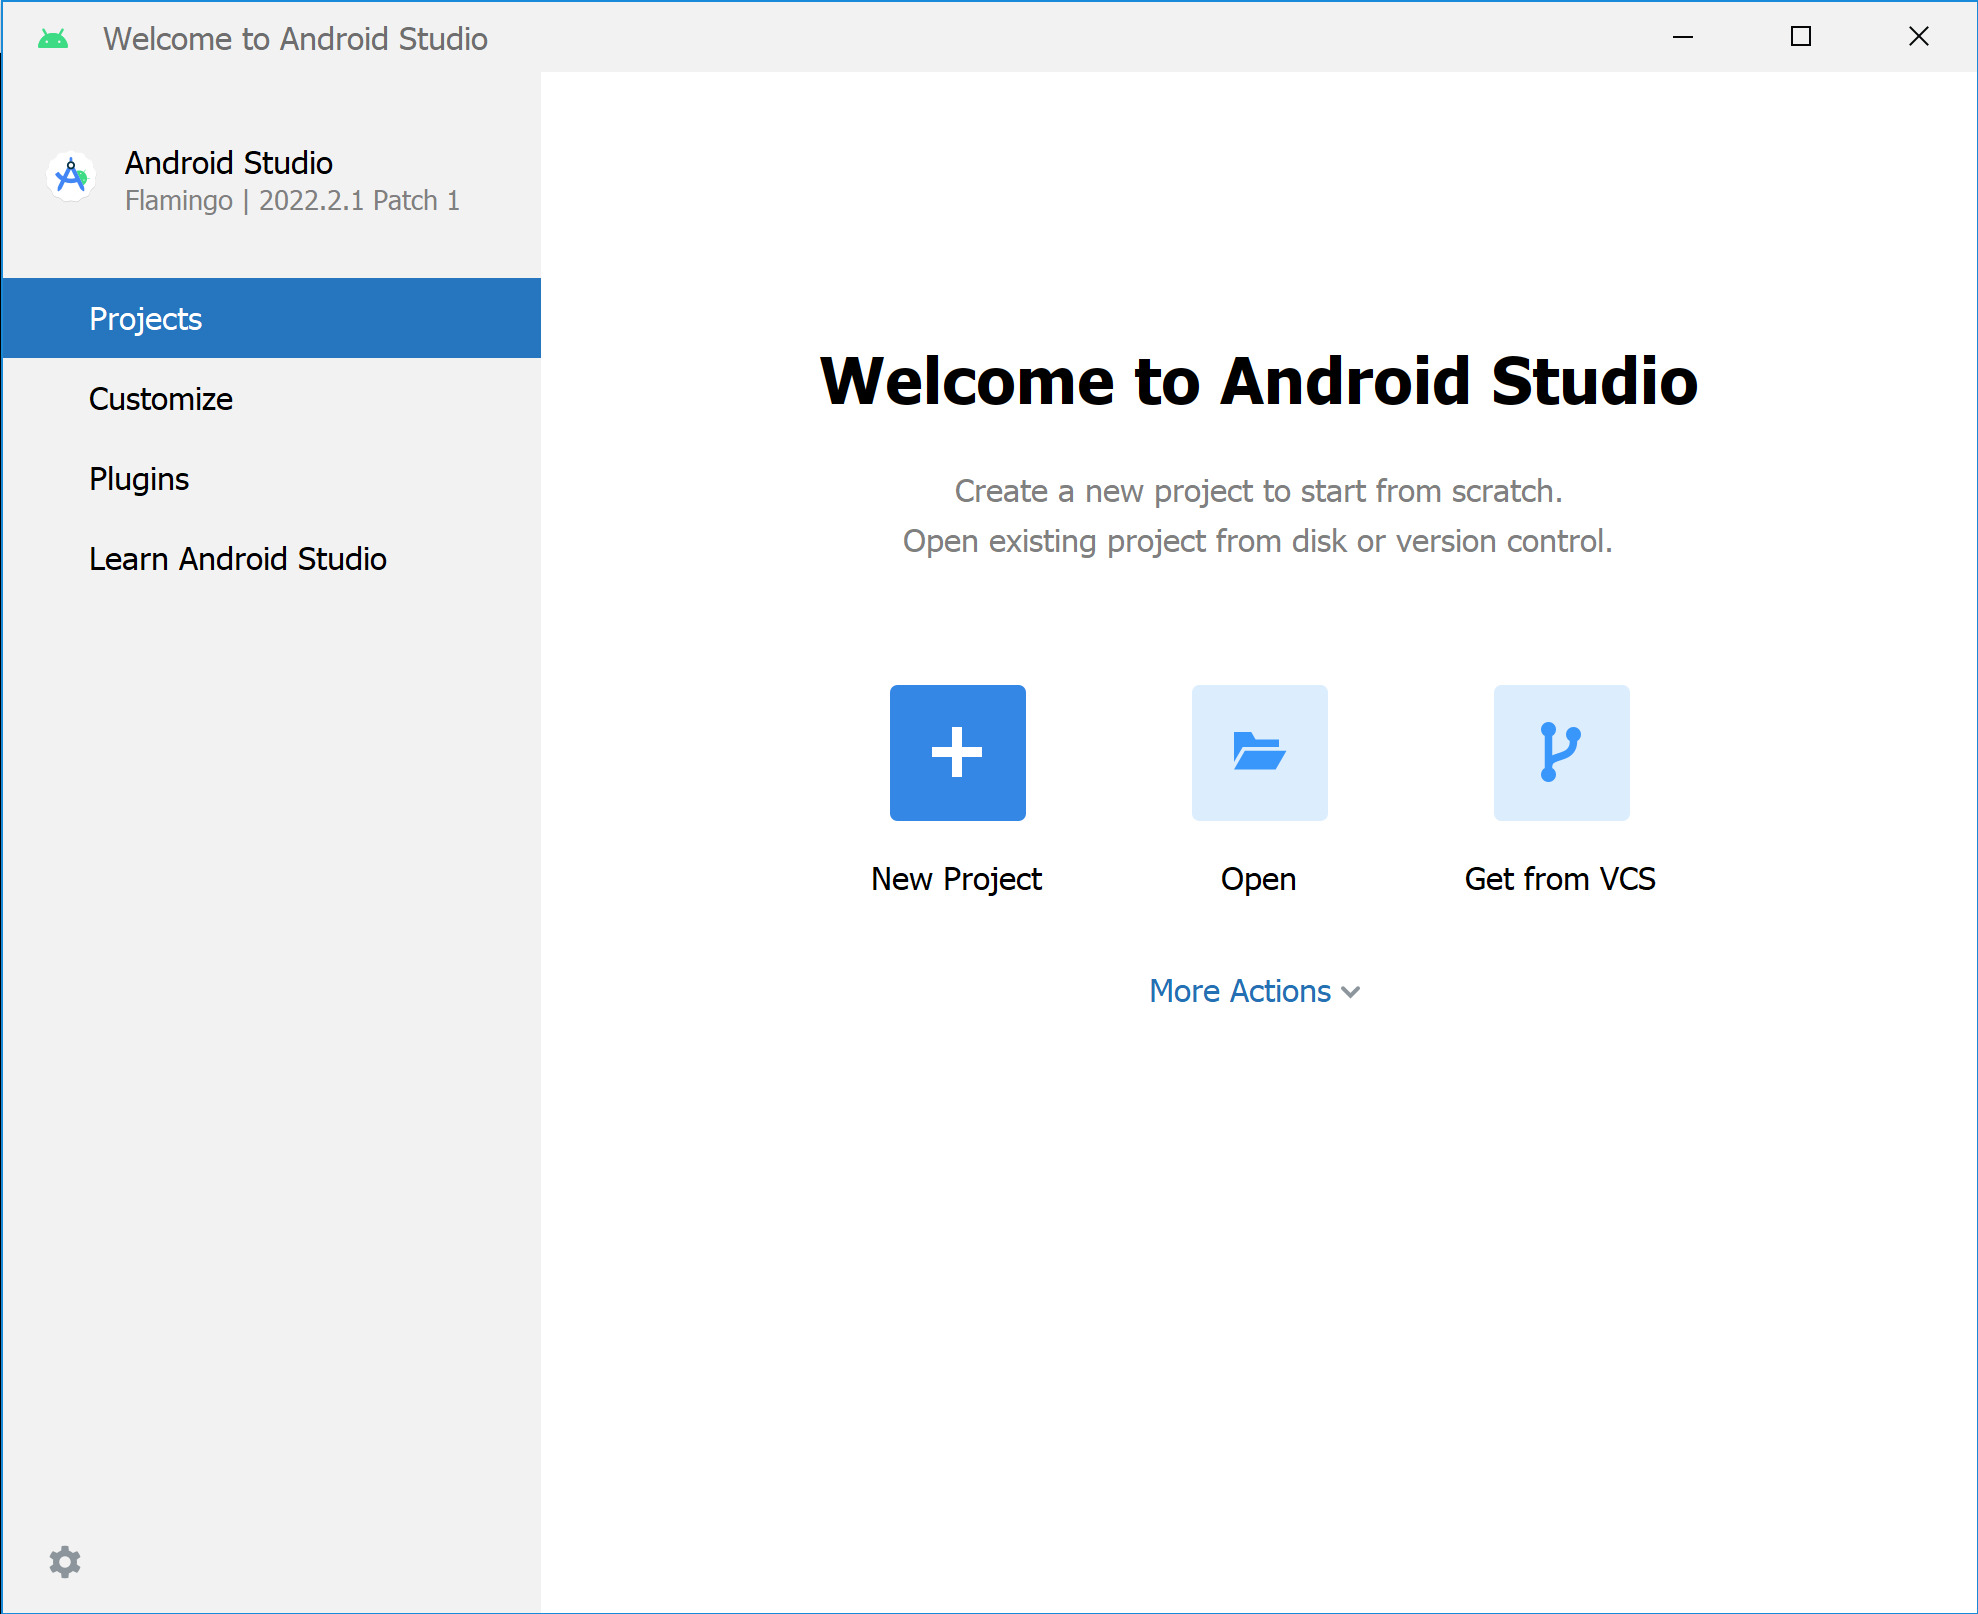 android-studio-in-depth-review